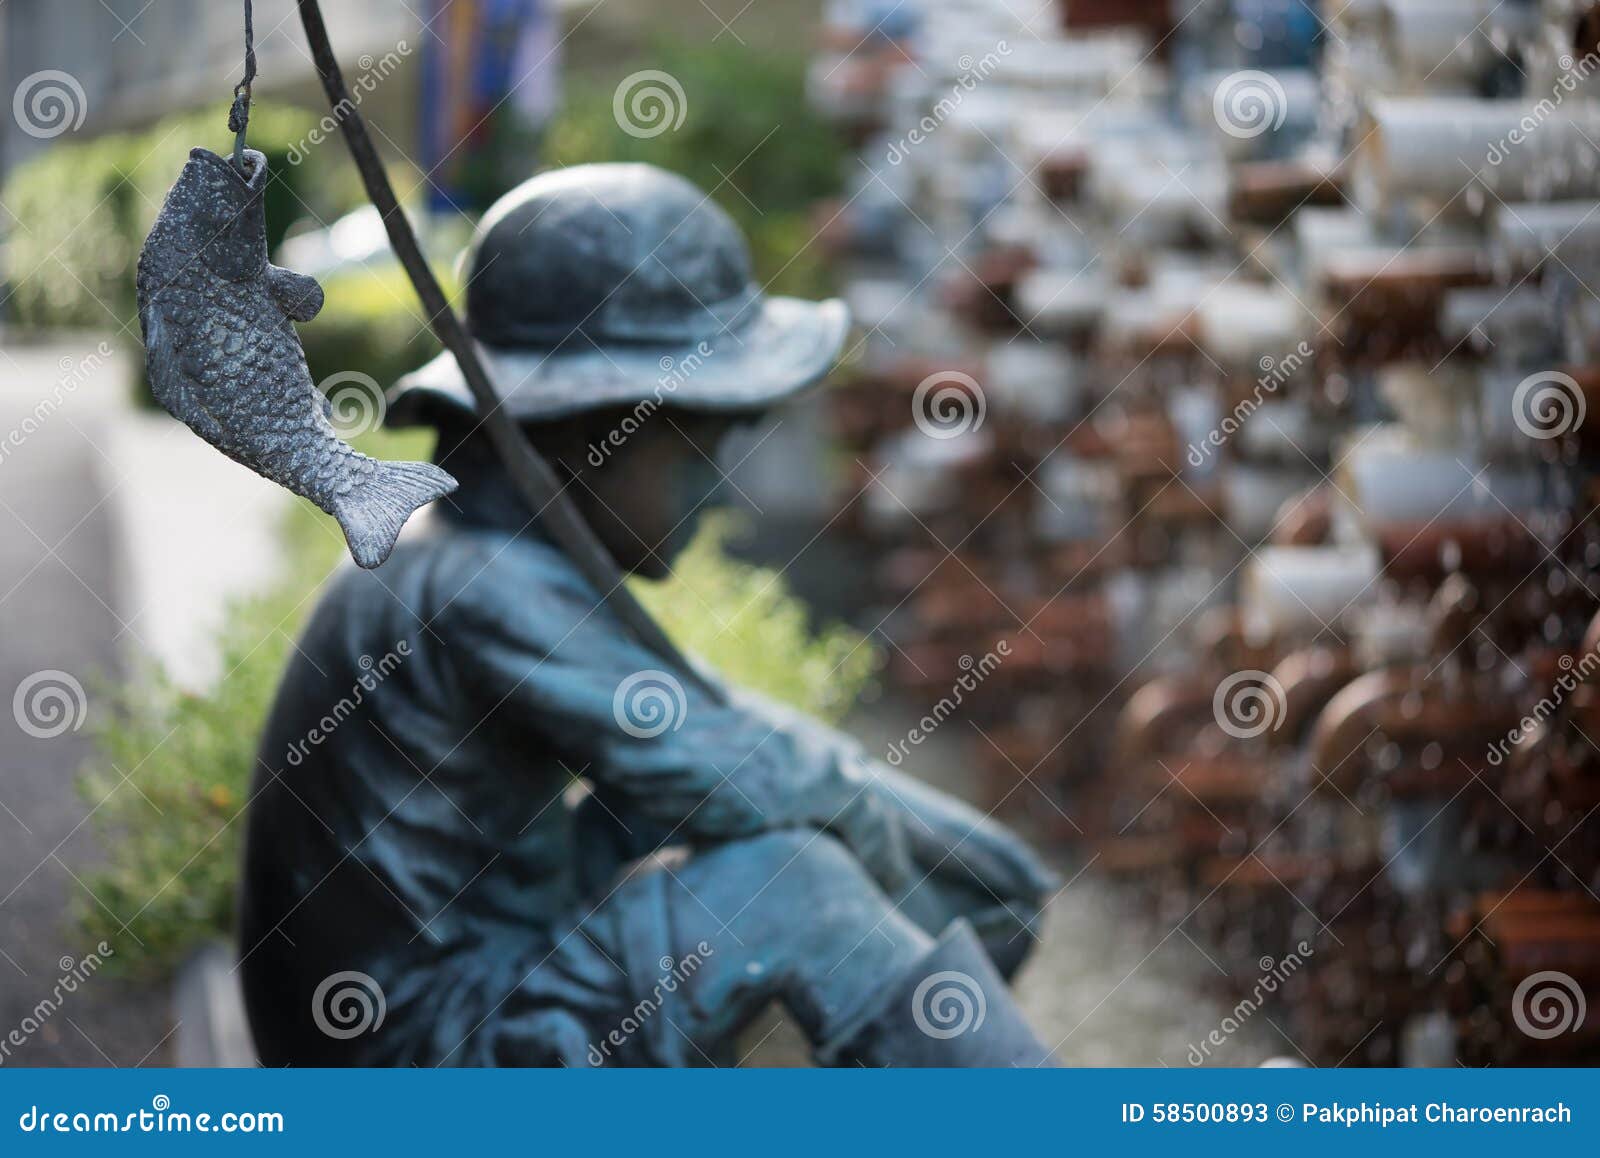 Sculpture of Little Boy Fishing in the Garden. Editorial Stock Photo -  Image of island, flowing: 58500893